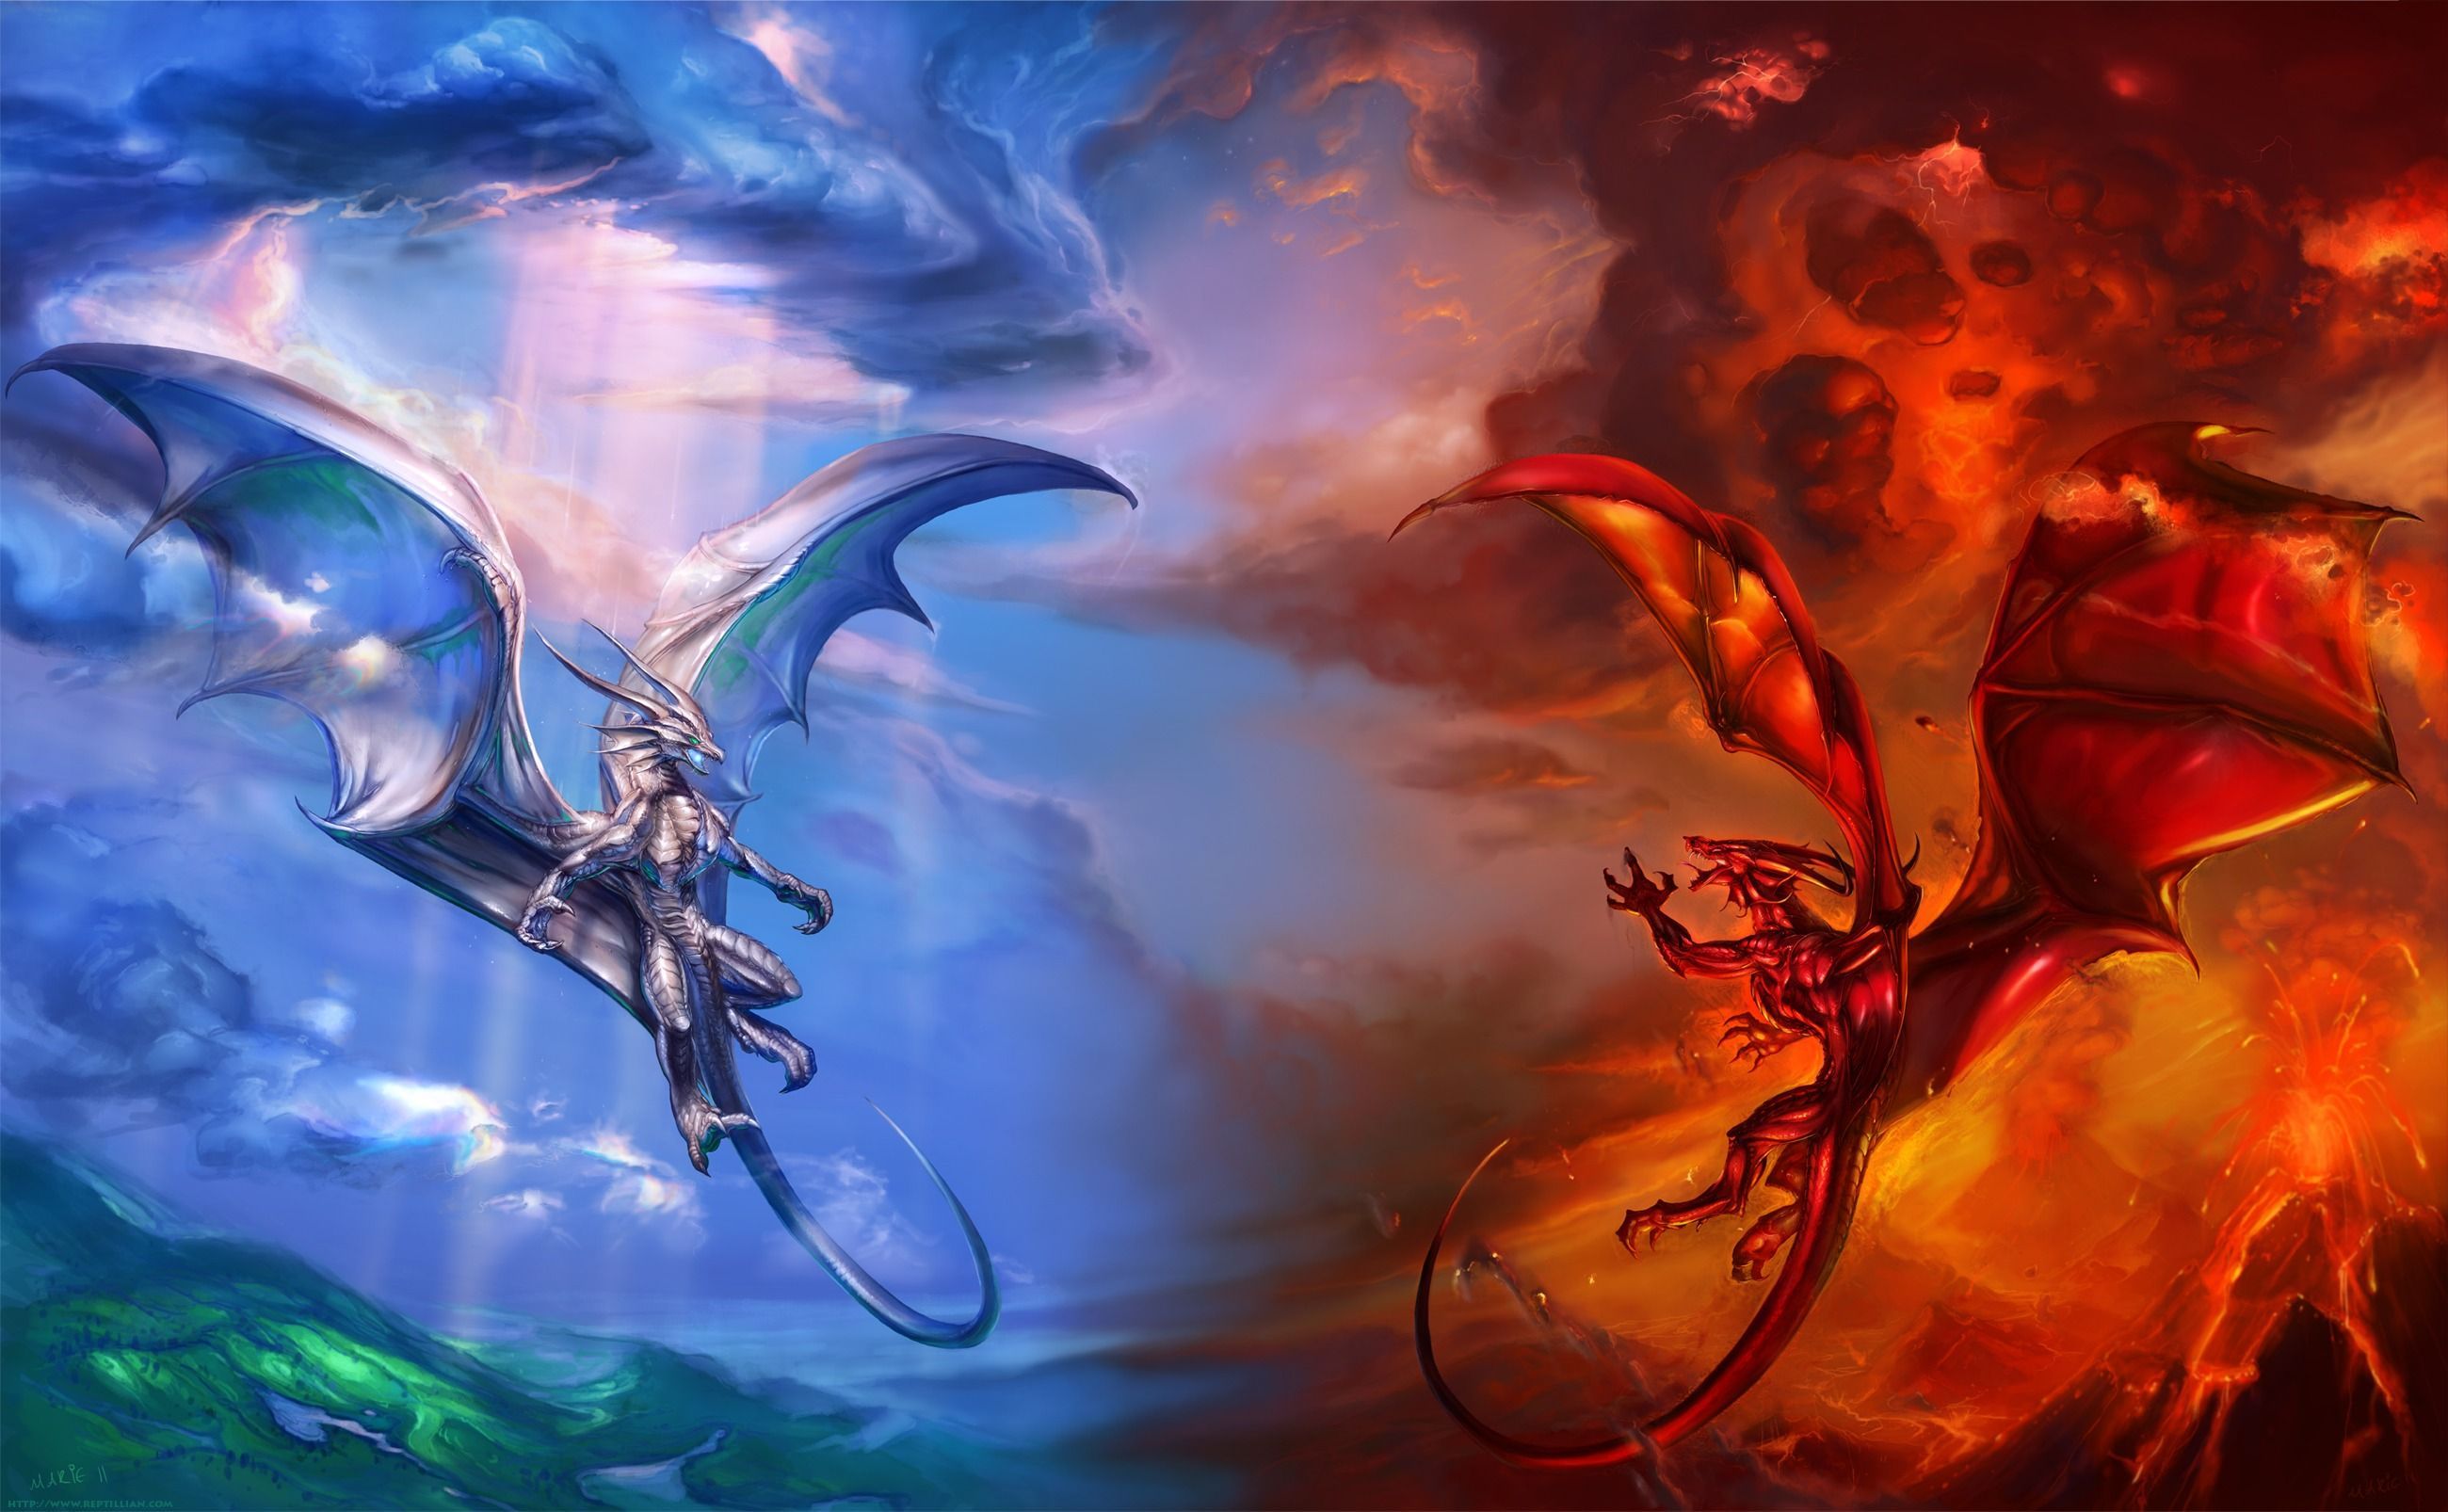 good vs bad Wallpaper Background. Fire and ice dragons, Dragon picture, Ice dragon